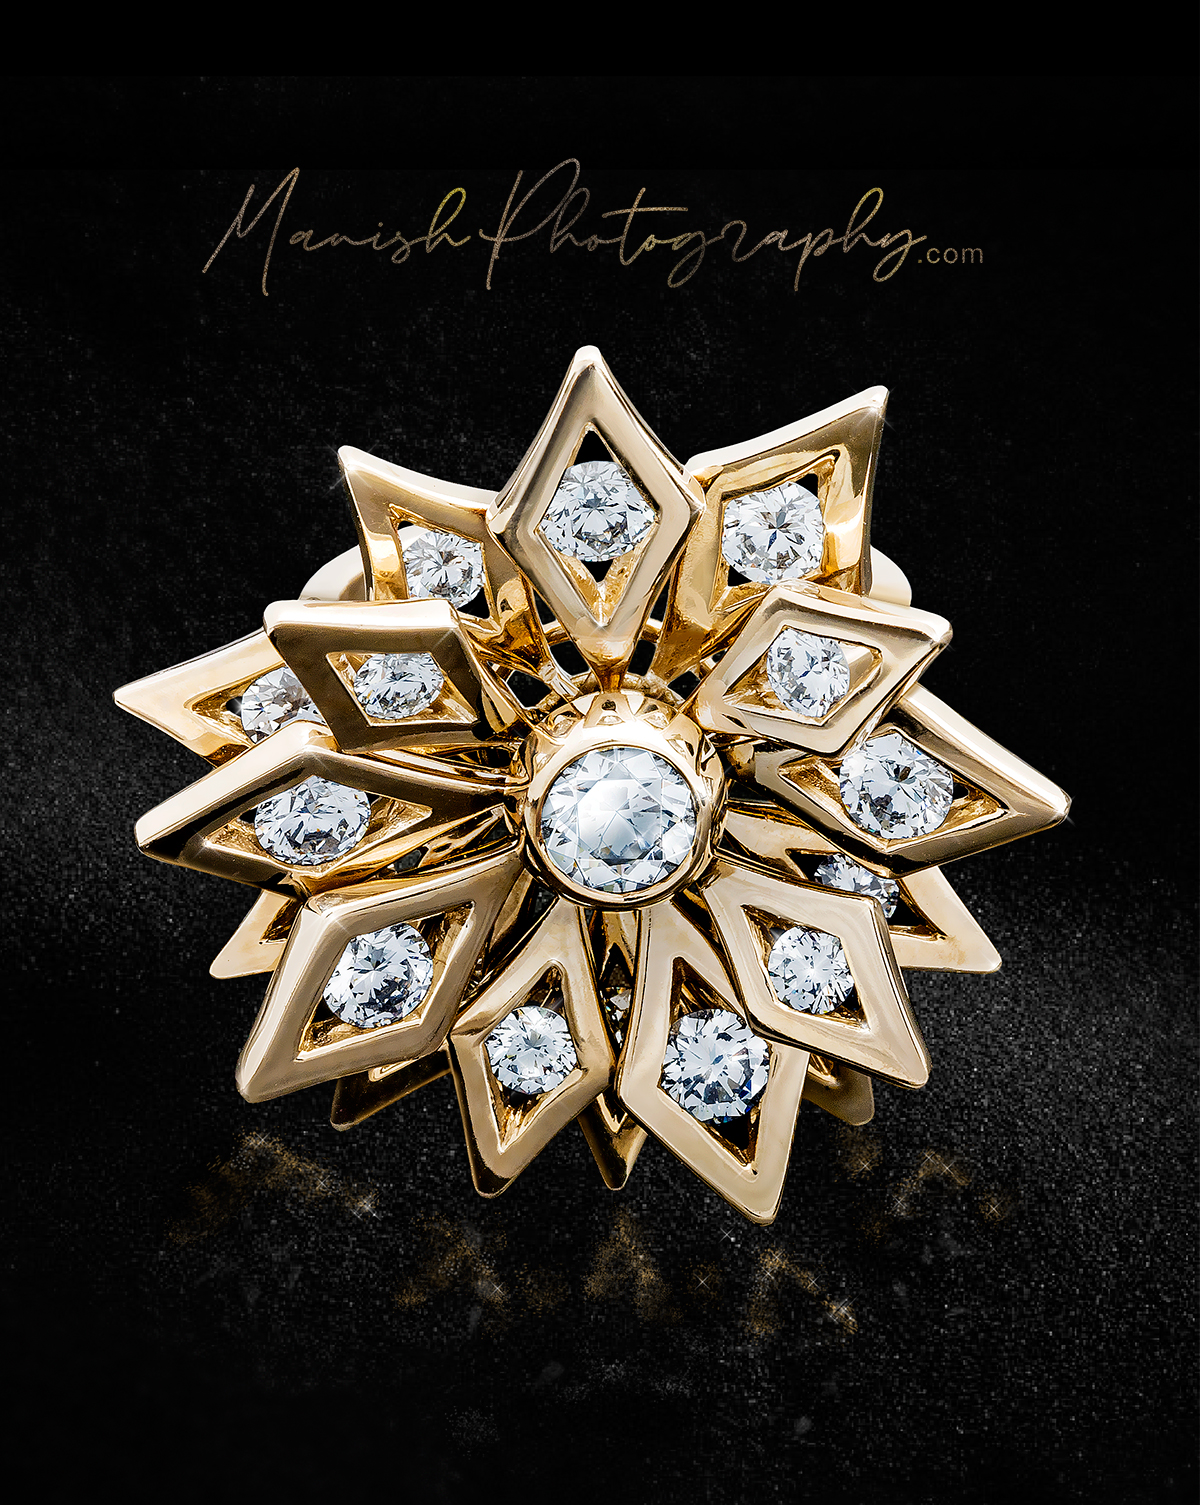 DeBeers Diamond and Gold ring jewellery mood shot by Manish Photography 